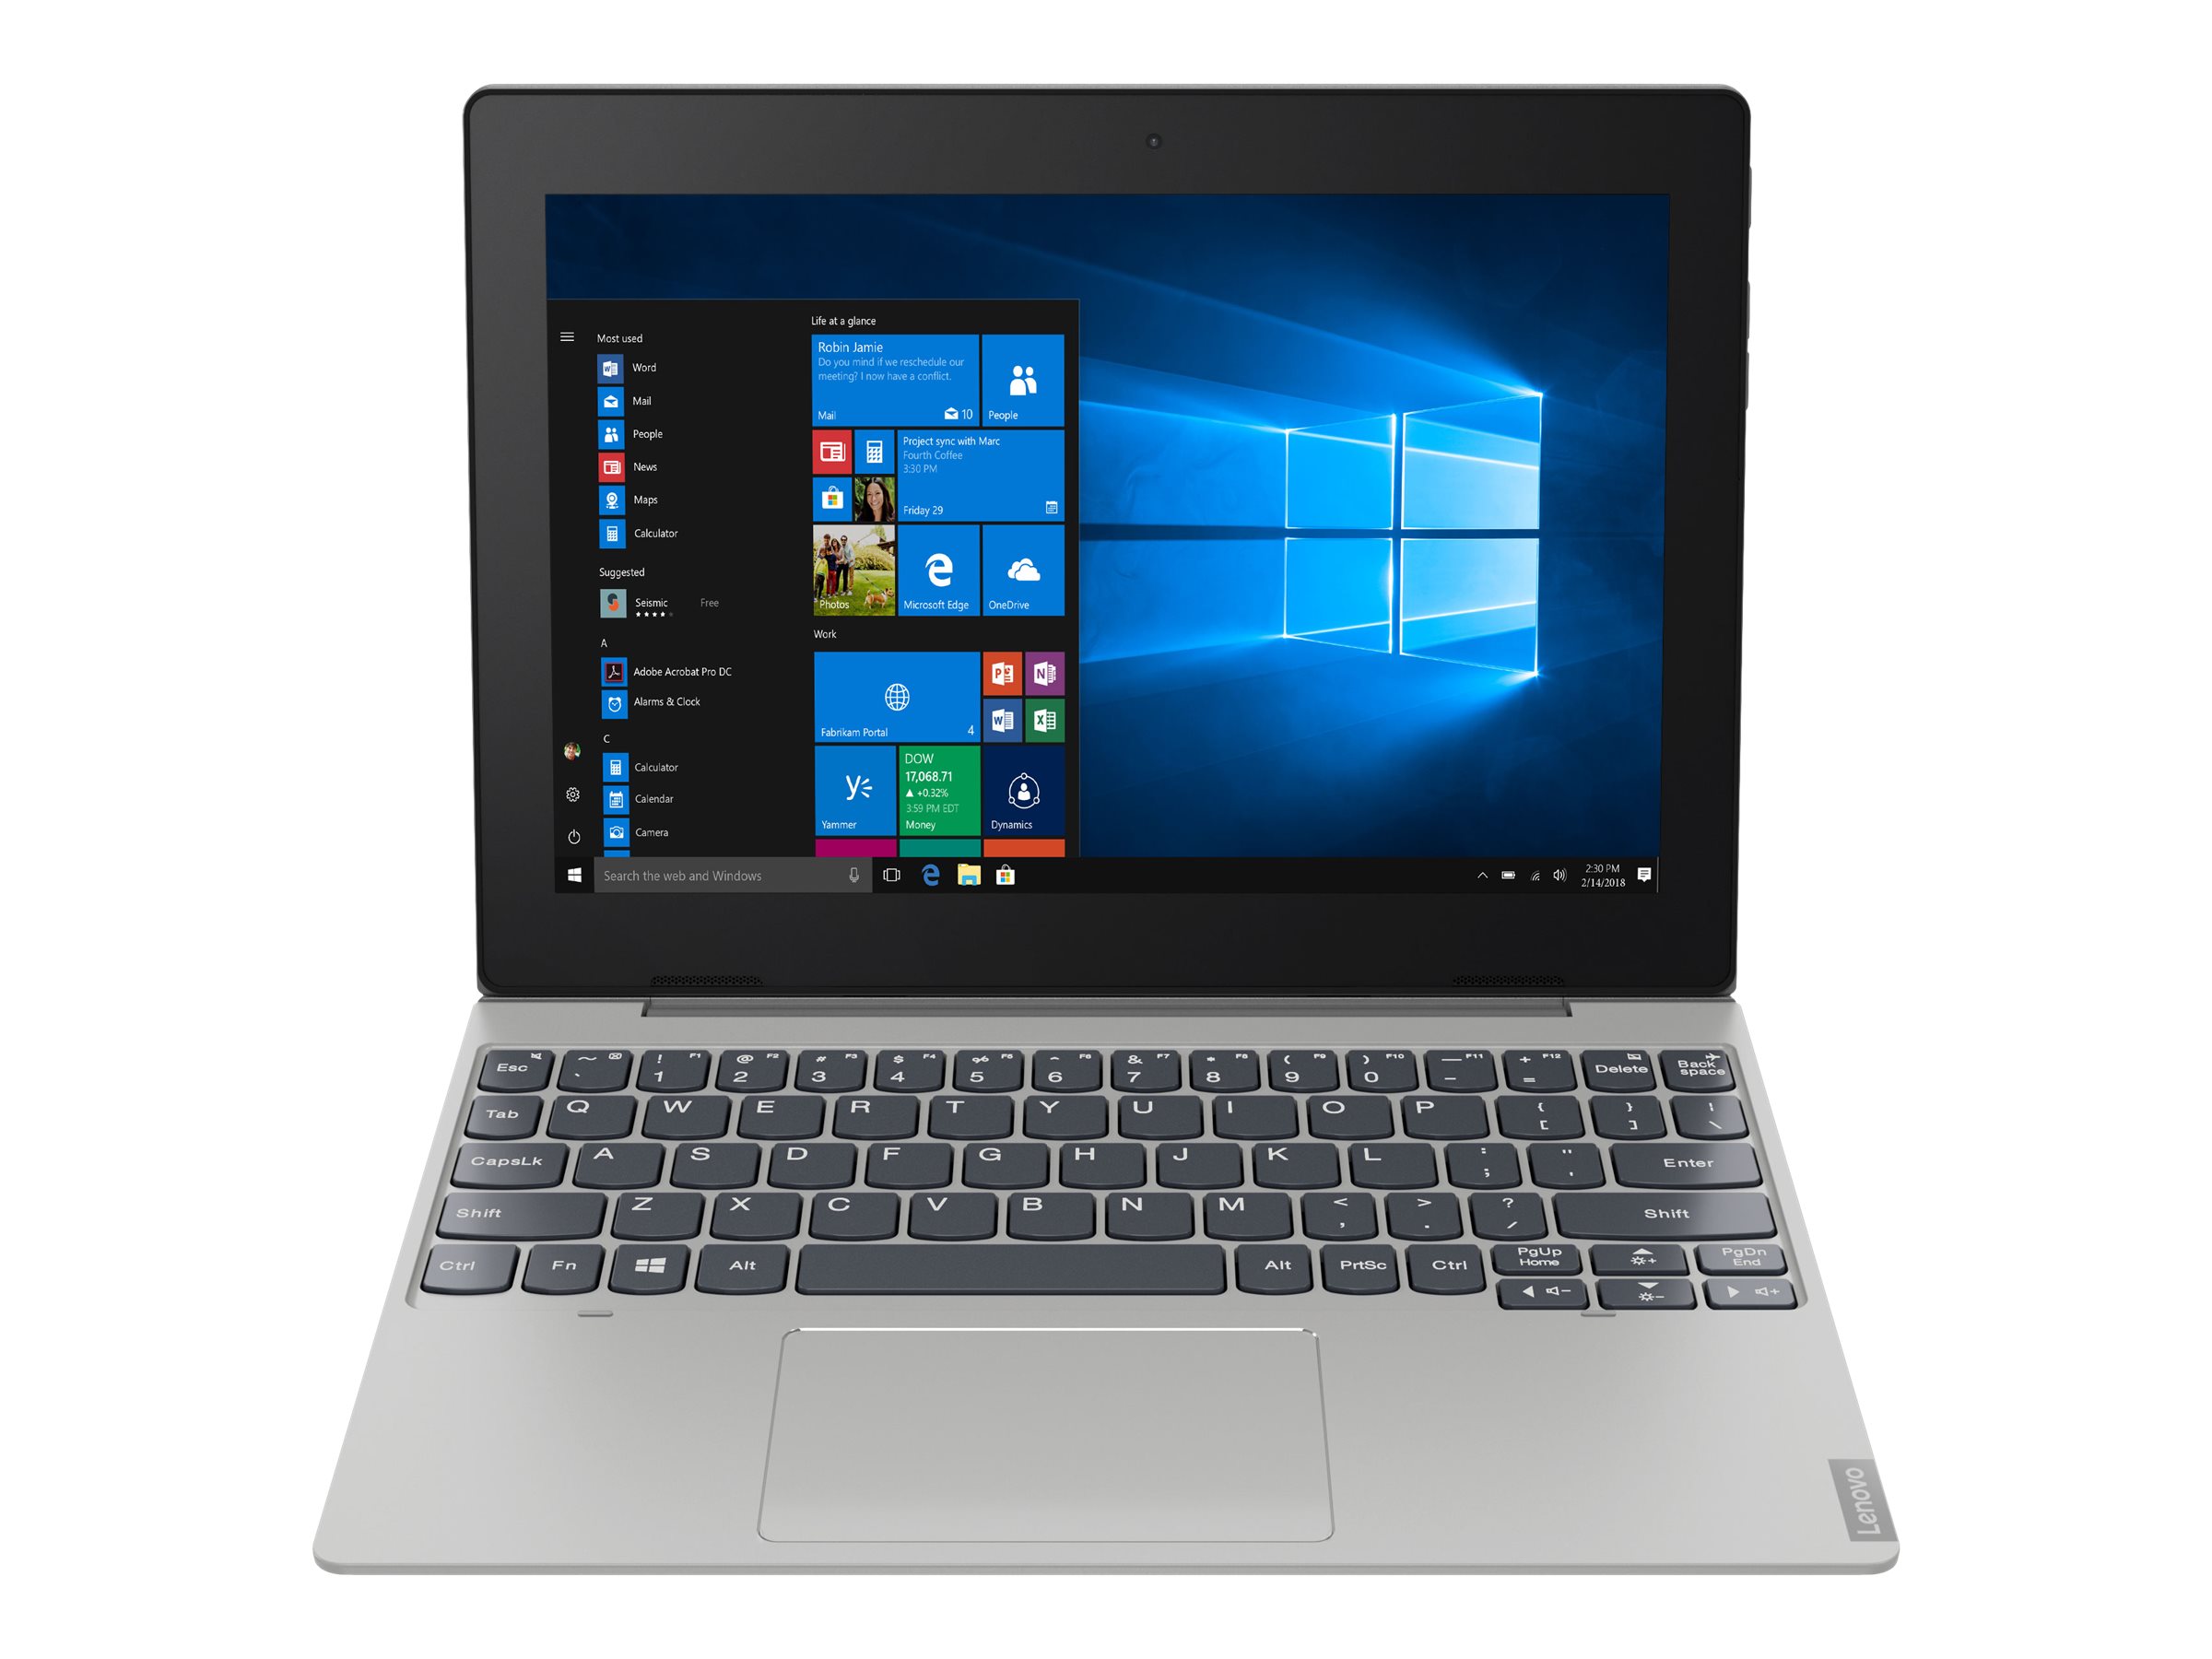 Lenovo IdeaPad D330-10IGM (81H3) - full specs, details and review